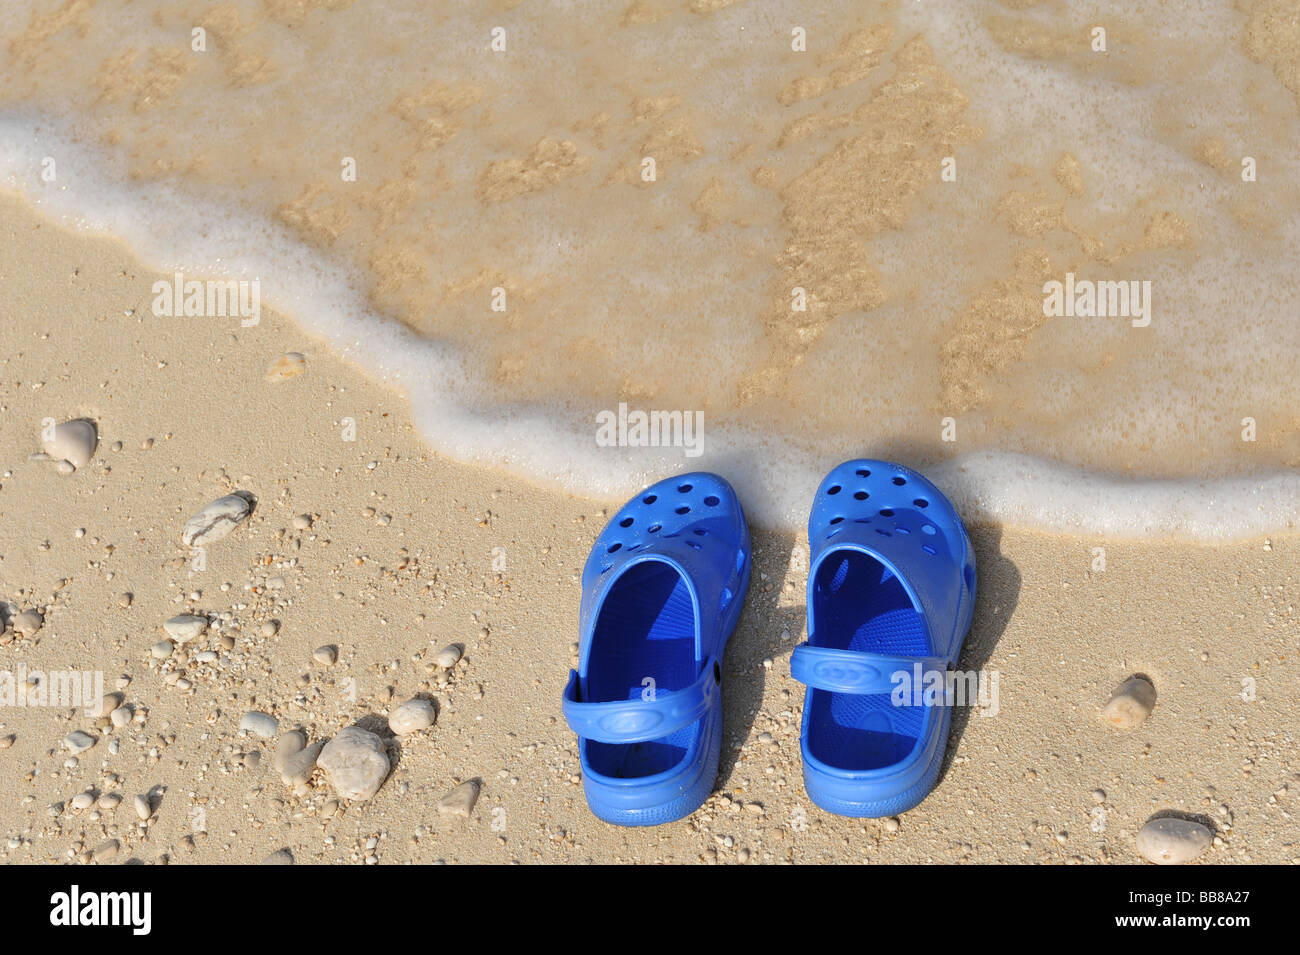 Pair of blue beach shoes or crocs at the edge of the sea with a small wave and sand Stock Photo